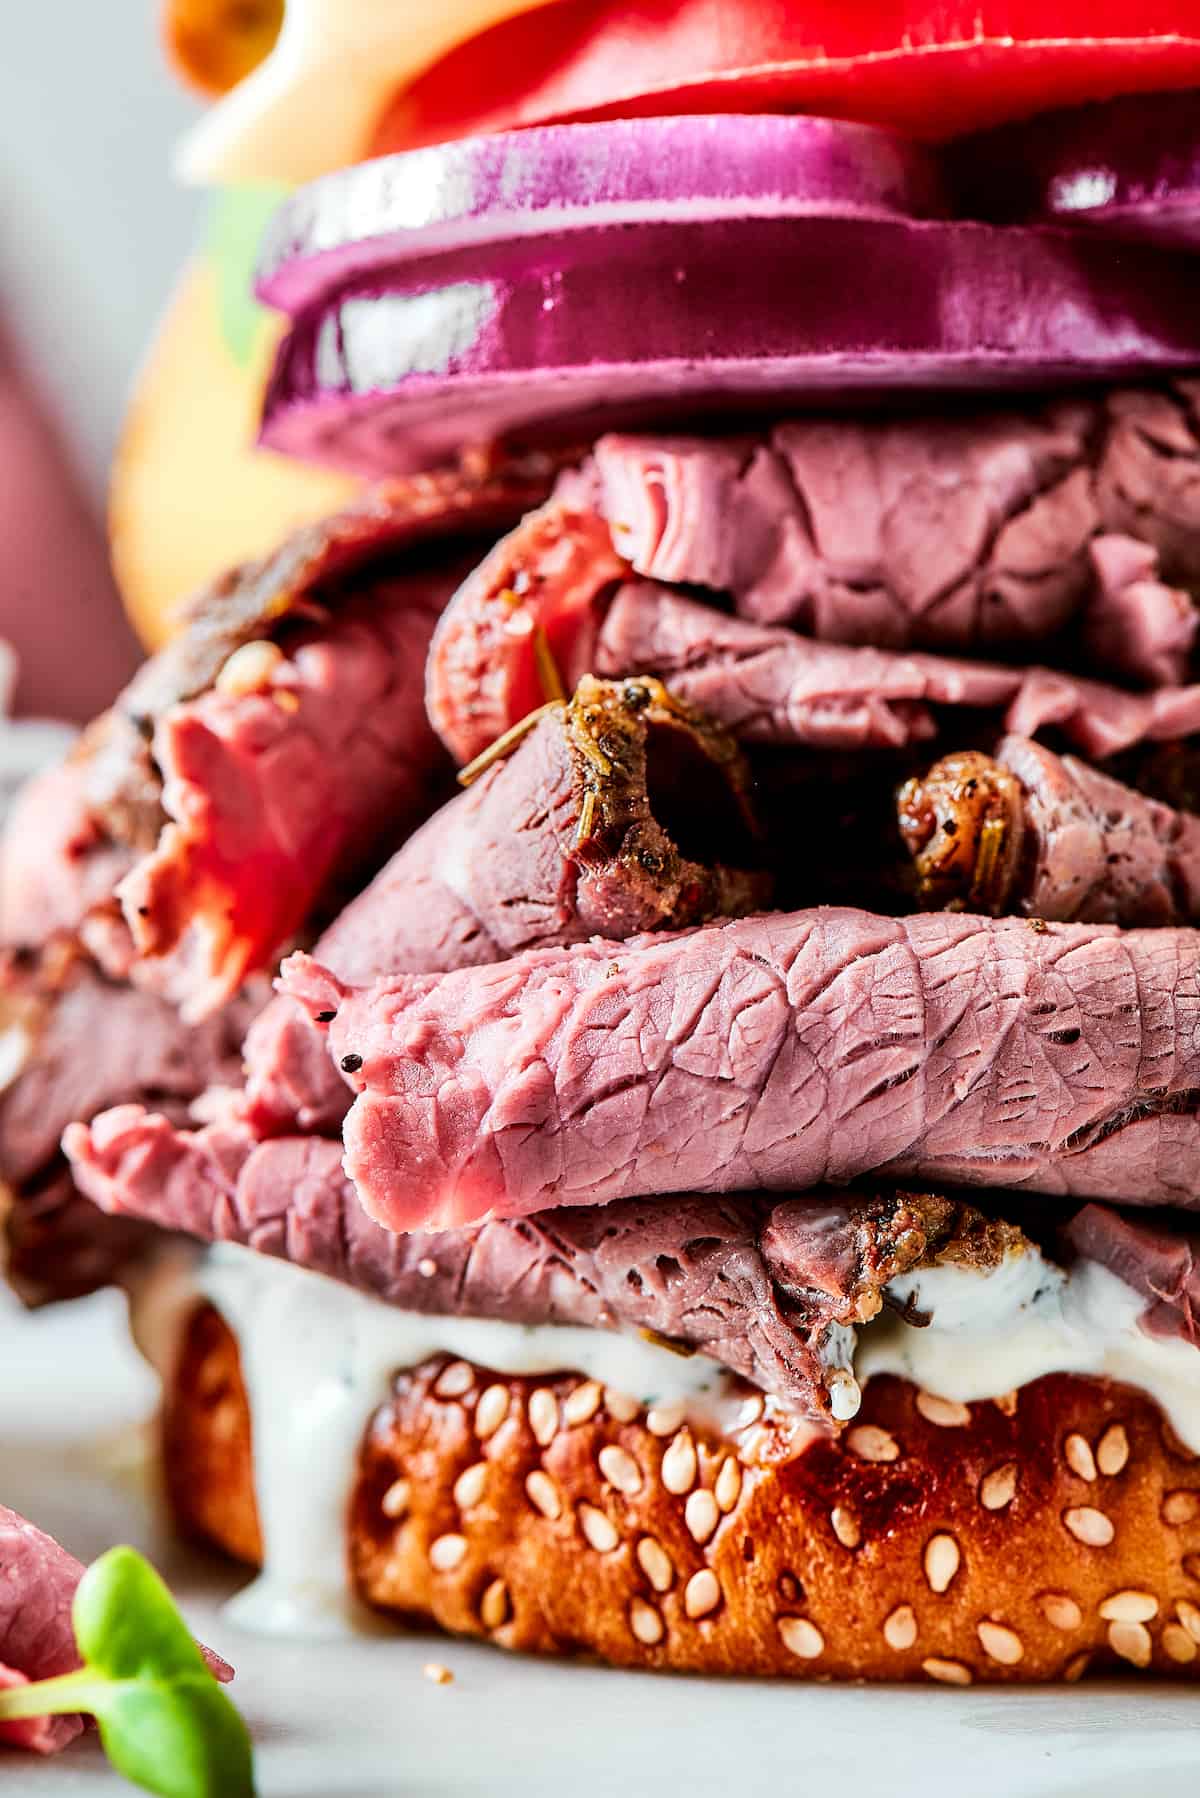 a close-up photo of a piled-high roast beef sandwich with sliced onion and tomato